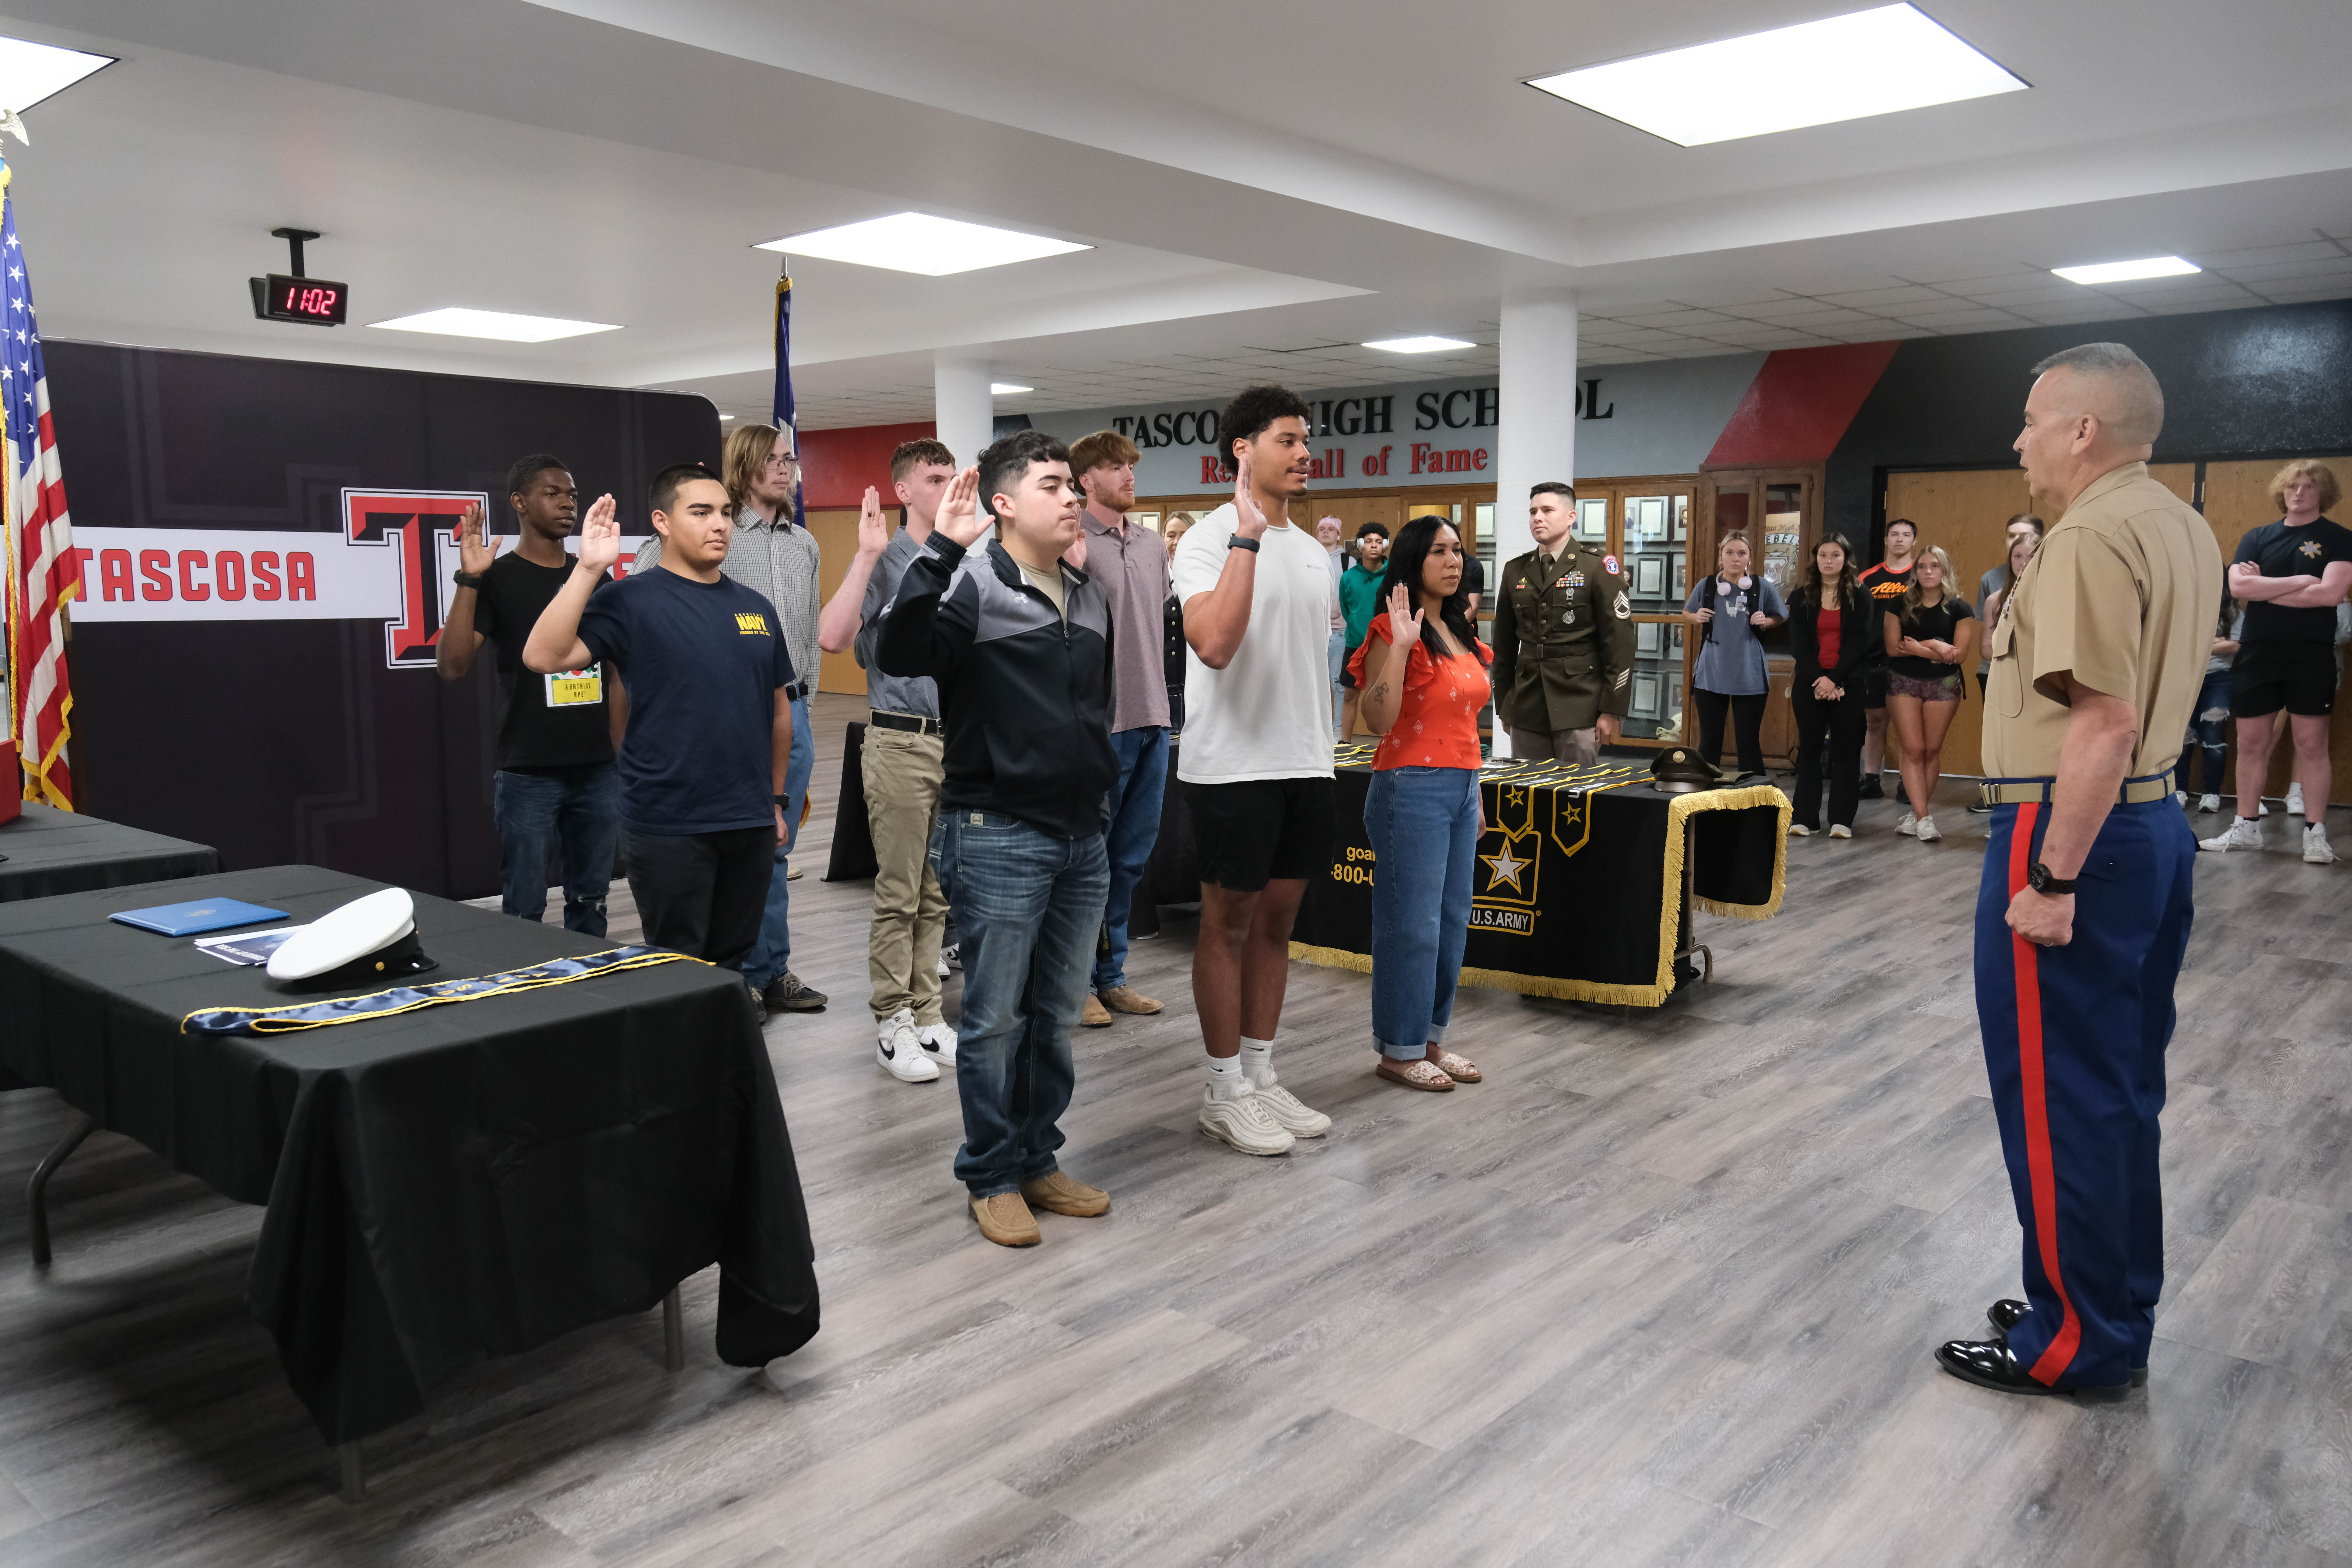 Eight Tascosa High School students take military oath at ceremony